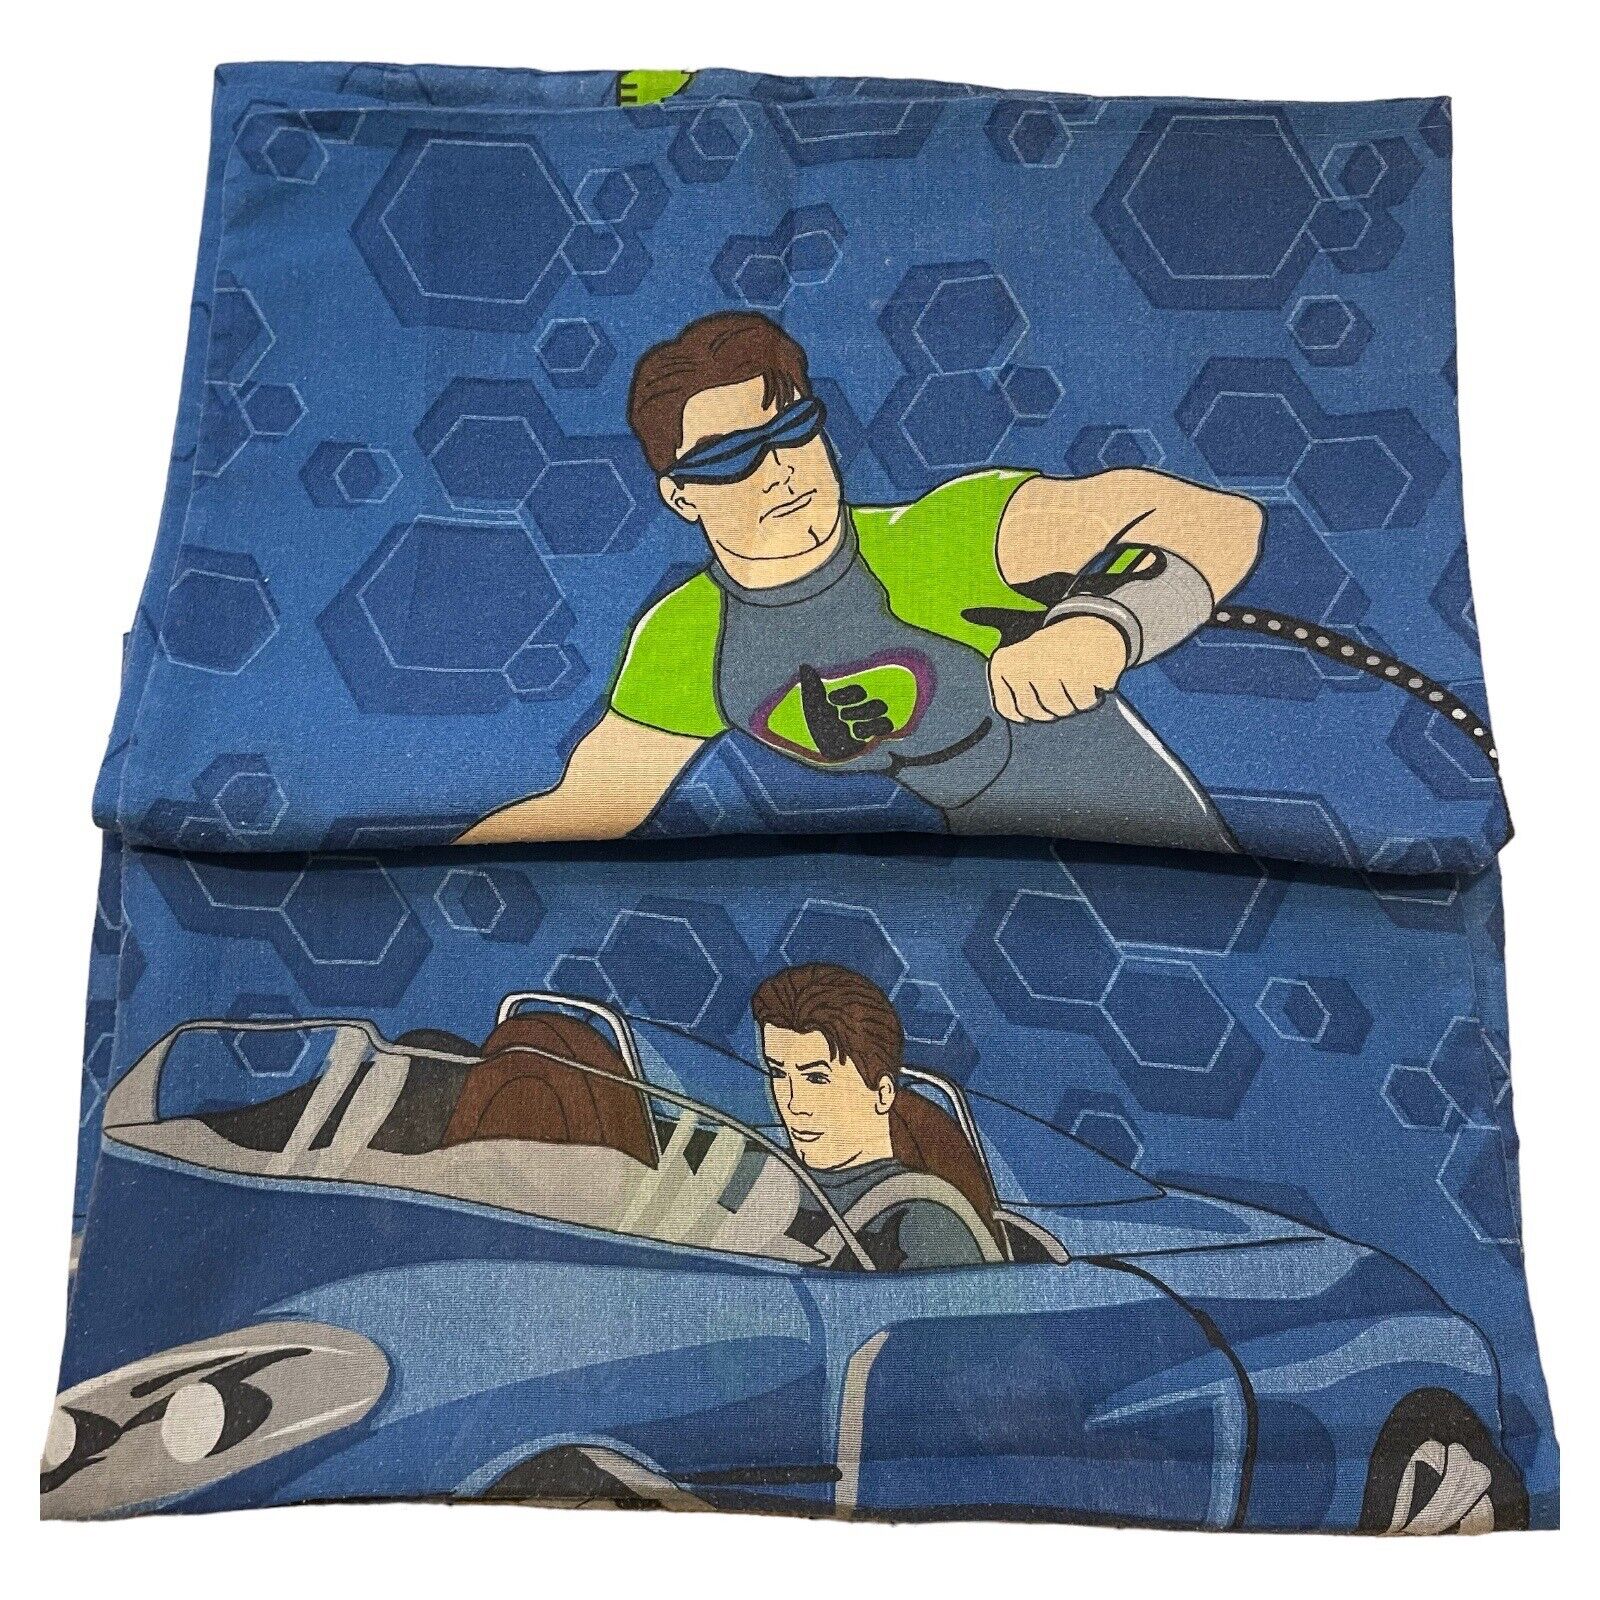 Vintage Max Steel Cartoon Character Race Car Pillow Case Cover Set (Fabric)